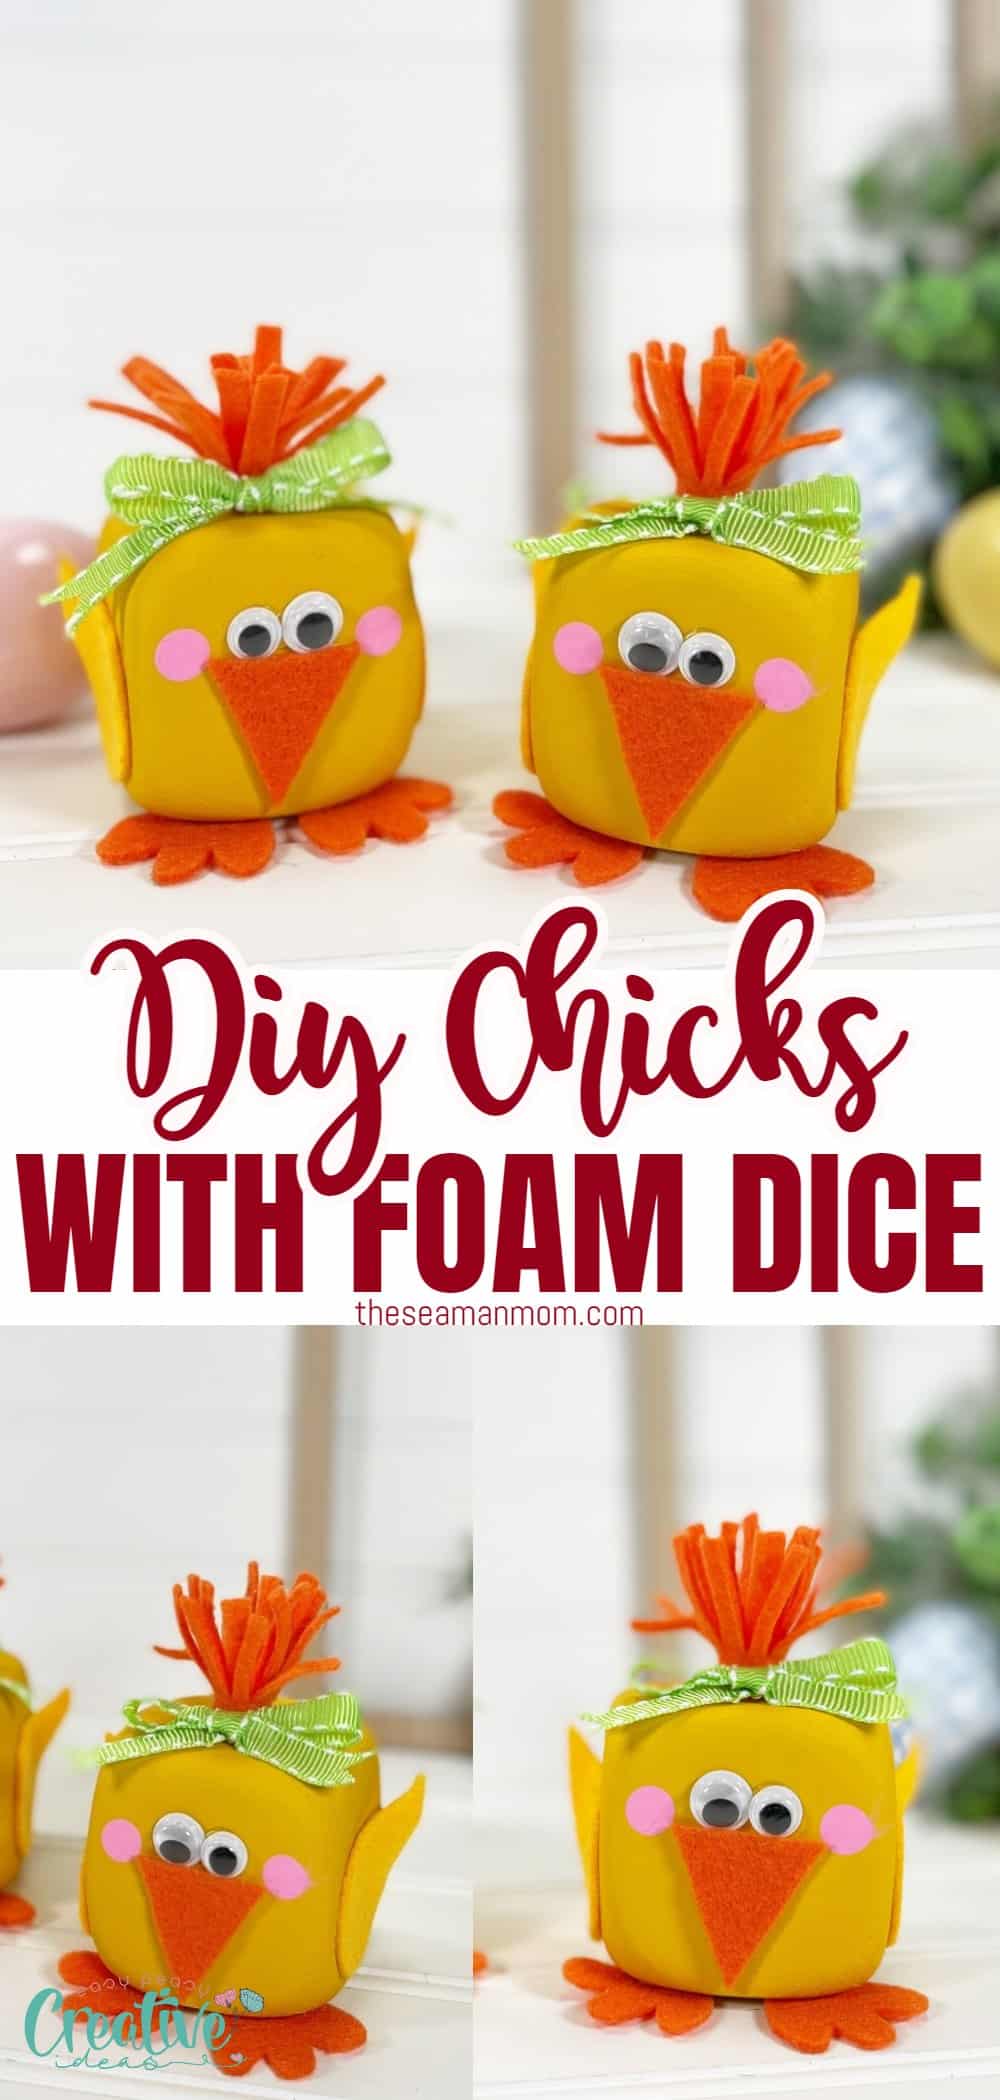 Gather your friends and family around to make the cutest chick craft this Easter! With a few supplies, you can create an adorable Easter chicks craft that will be perfect for home decor or gifts.  via @petroneagu